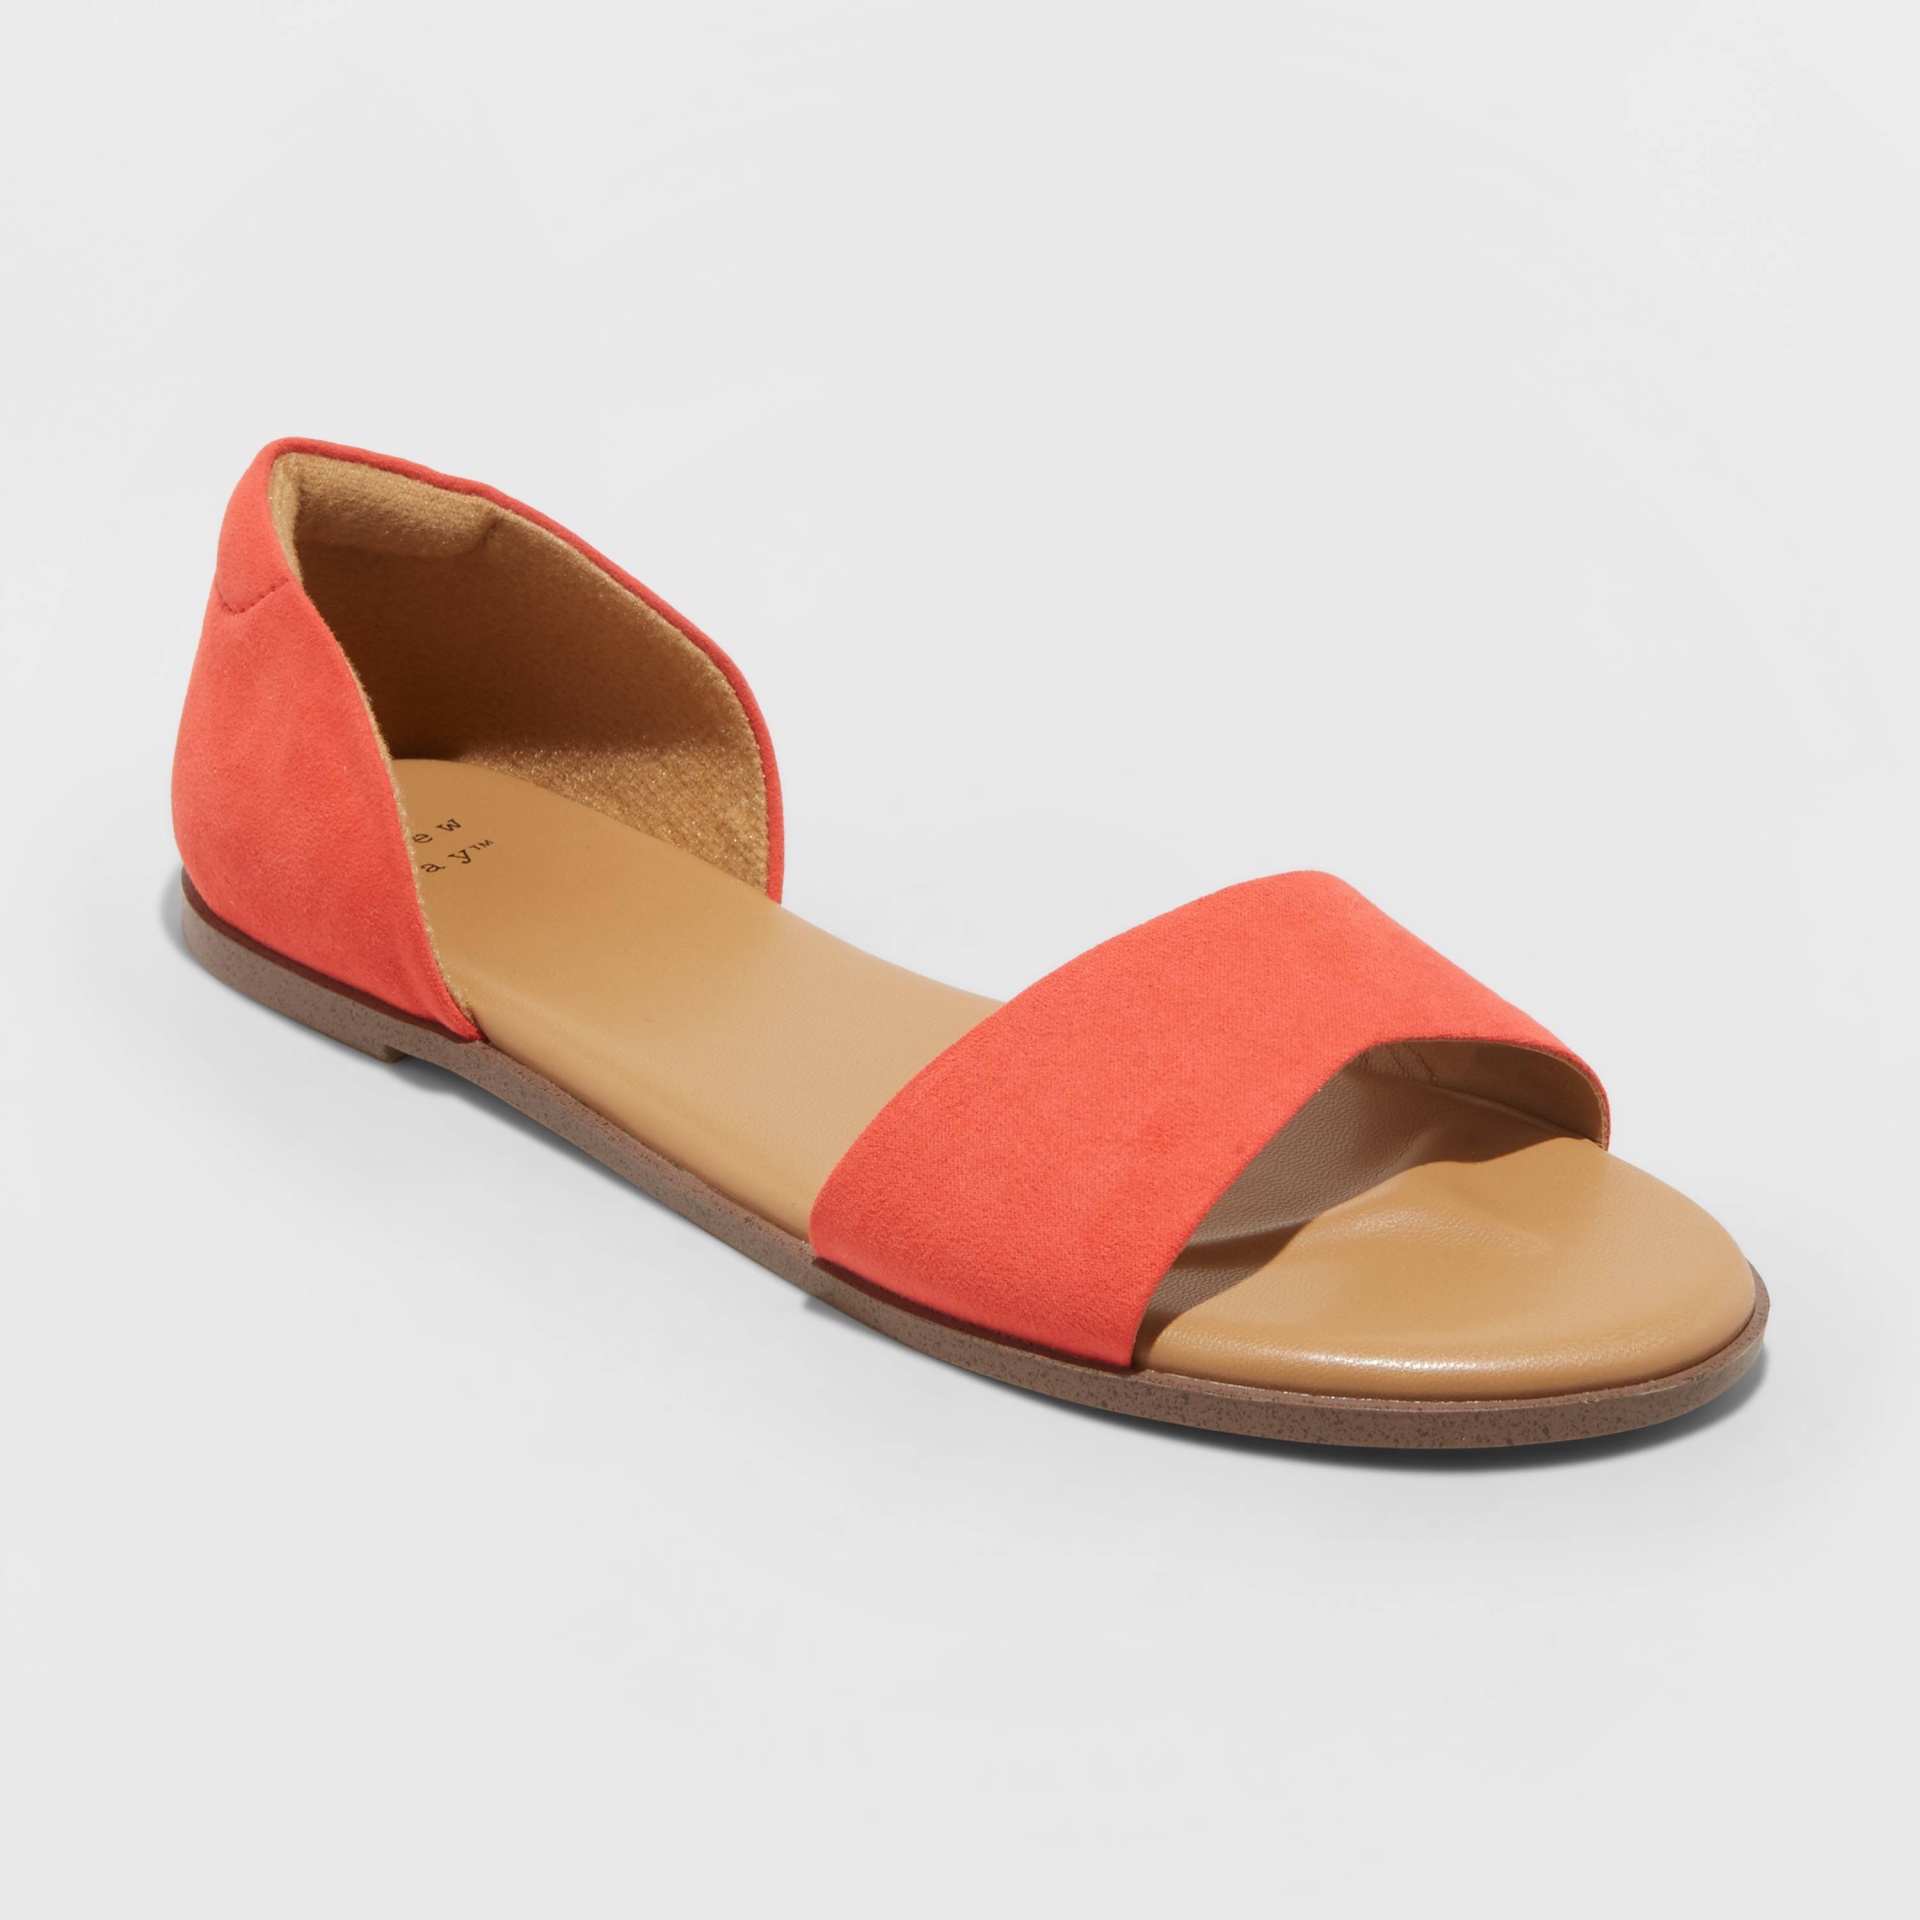 slide 1 of 4, Women's Ann Two Piece Slide Sandals - A New Day Coral 7, 1 ct